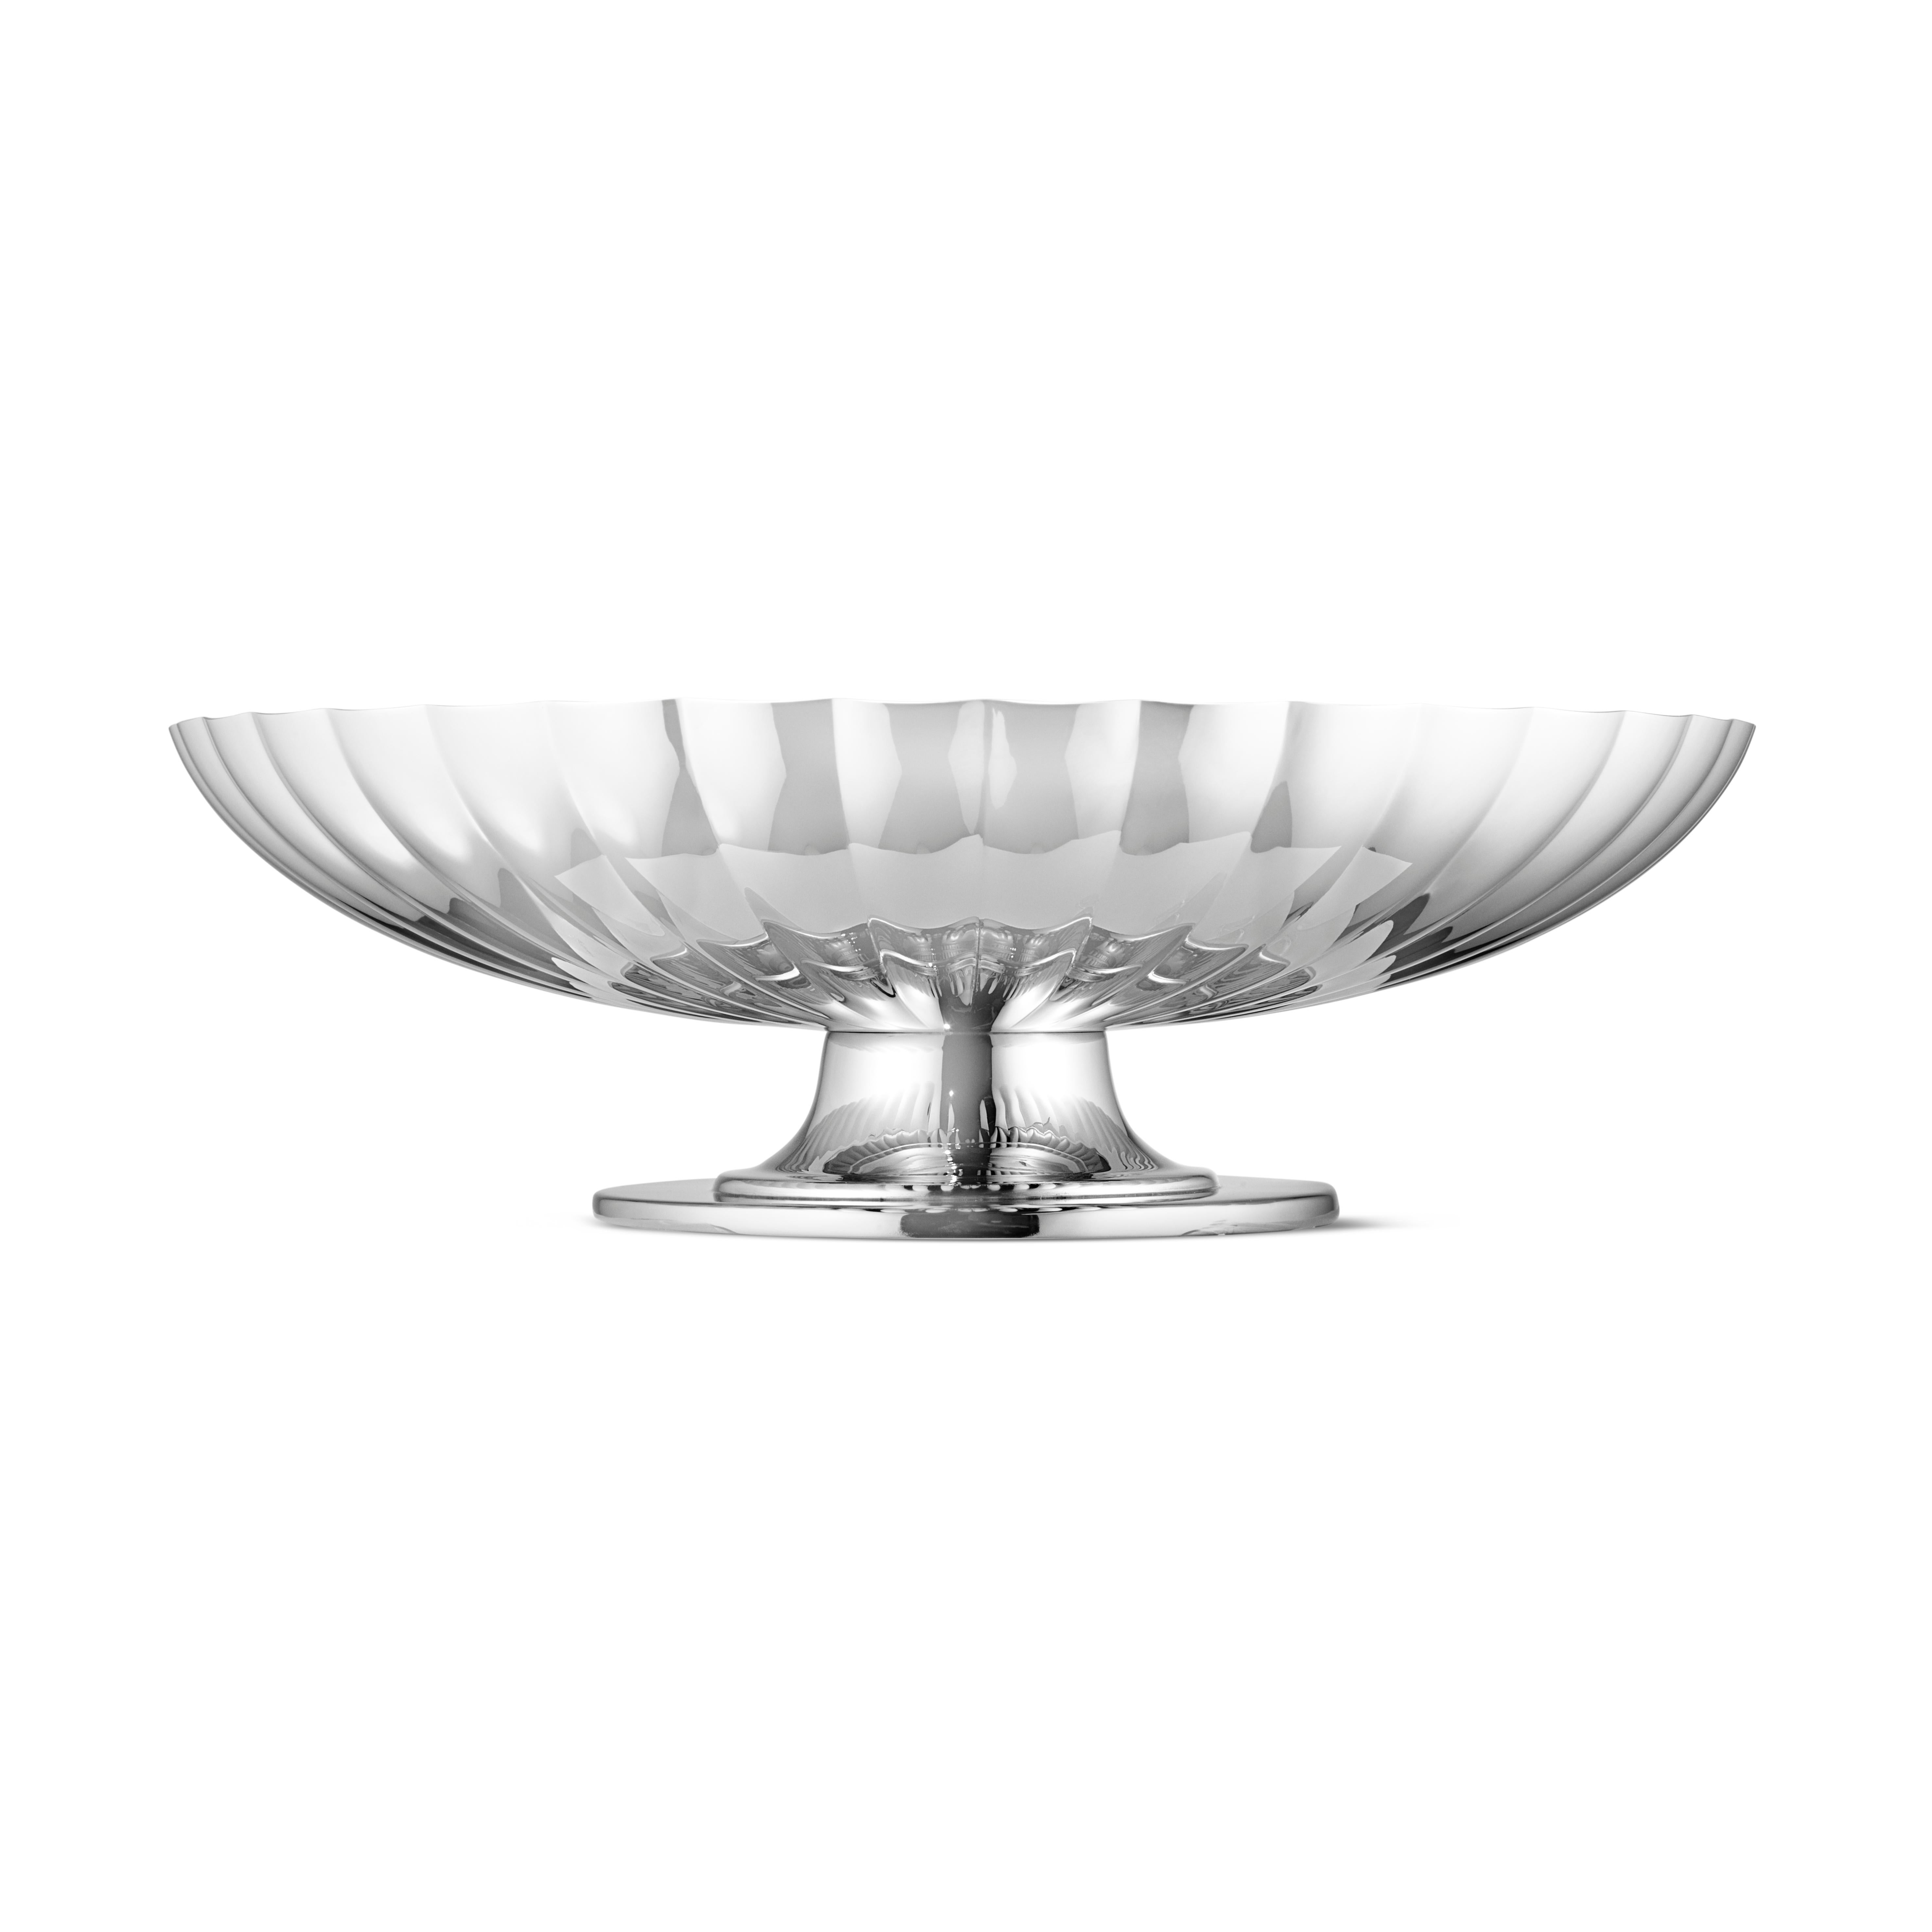 The Bernadotted dish on stand continues the beloved contours of the legendary designer Sigvard Bernadotte. Inspired by Sigvard Bernadotte and designed by the Georg Jensen design team, the dish serves to complete the line of table decor in the